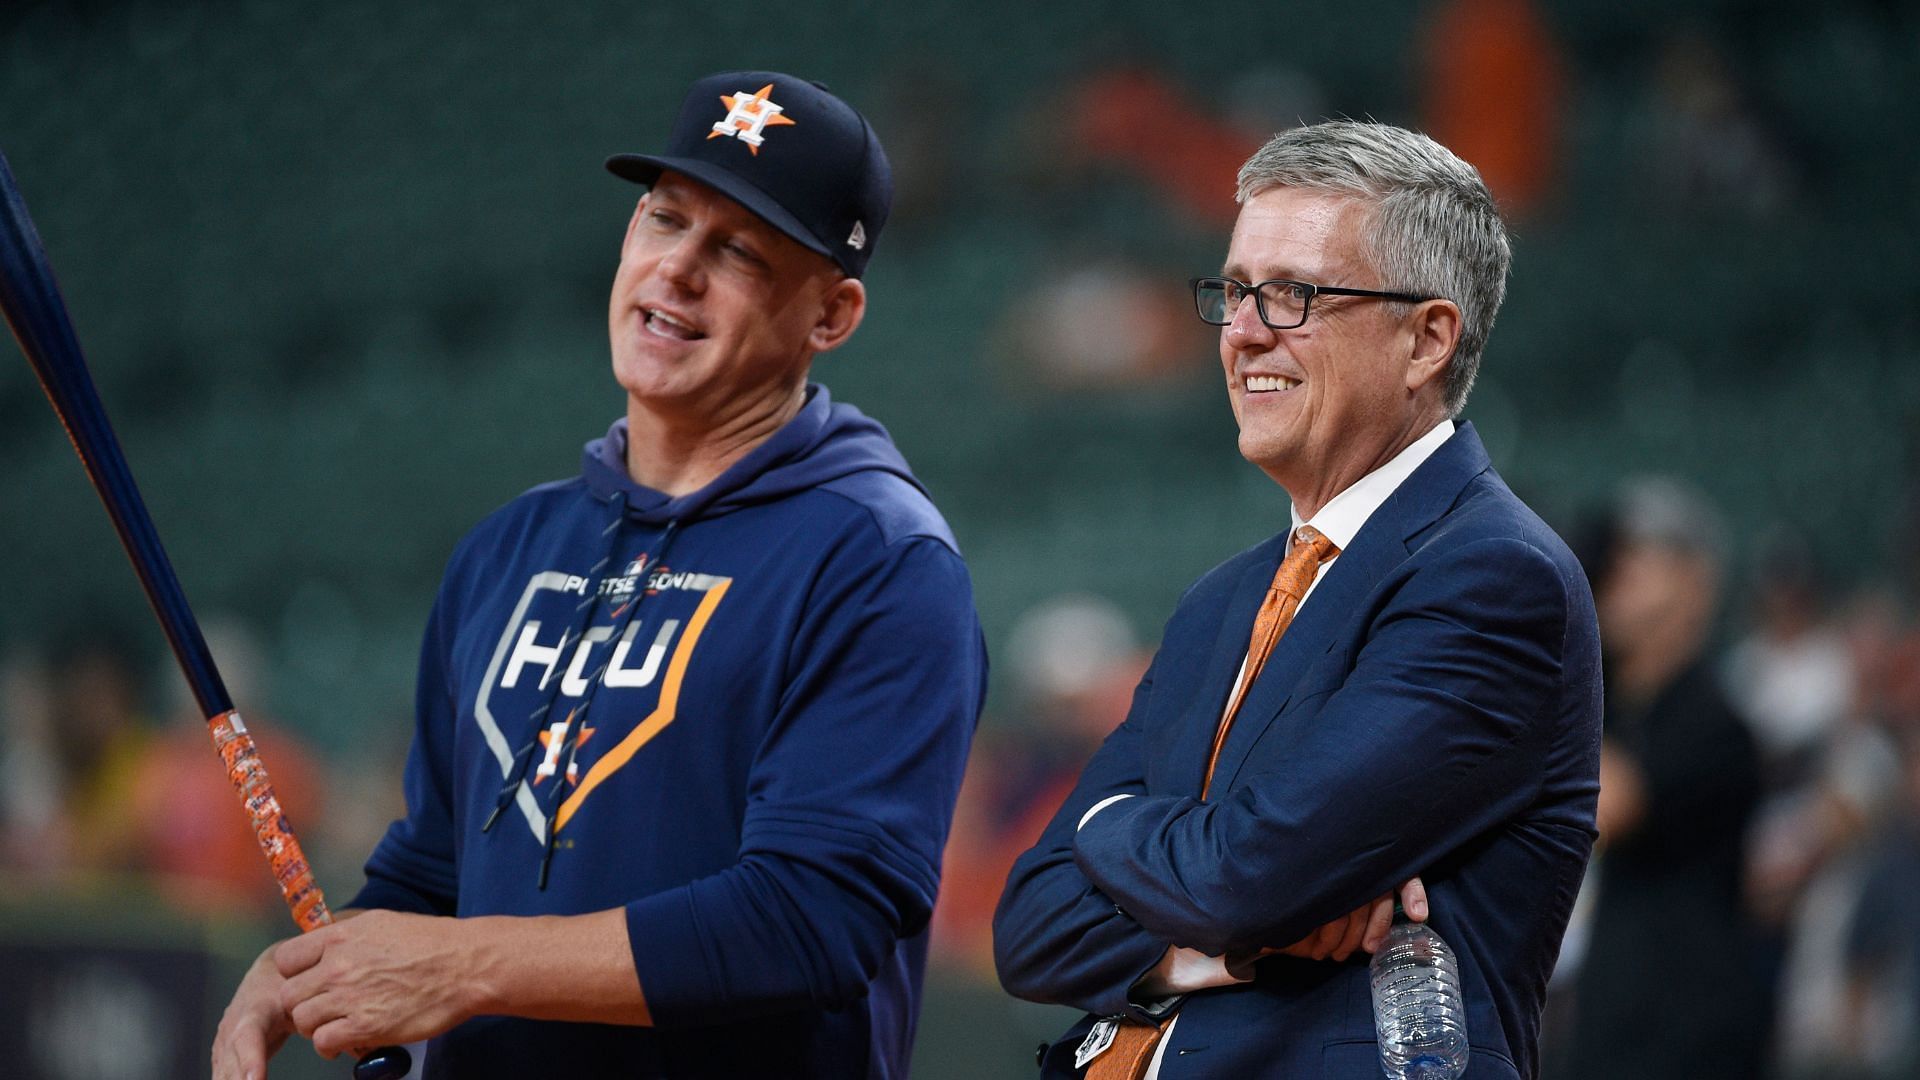 Jeff Luhnow and manager A.J. Hinch